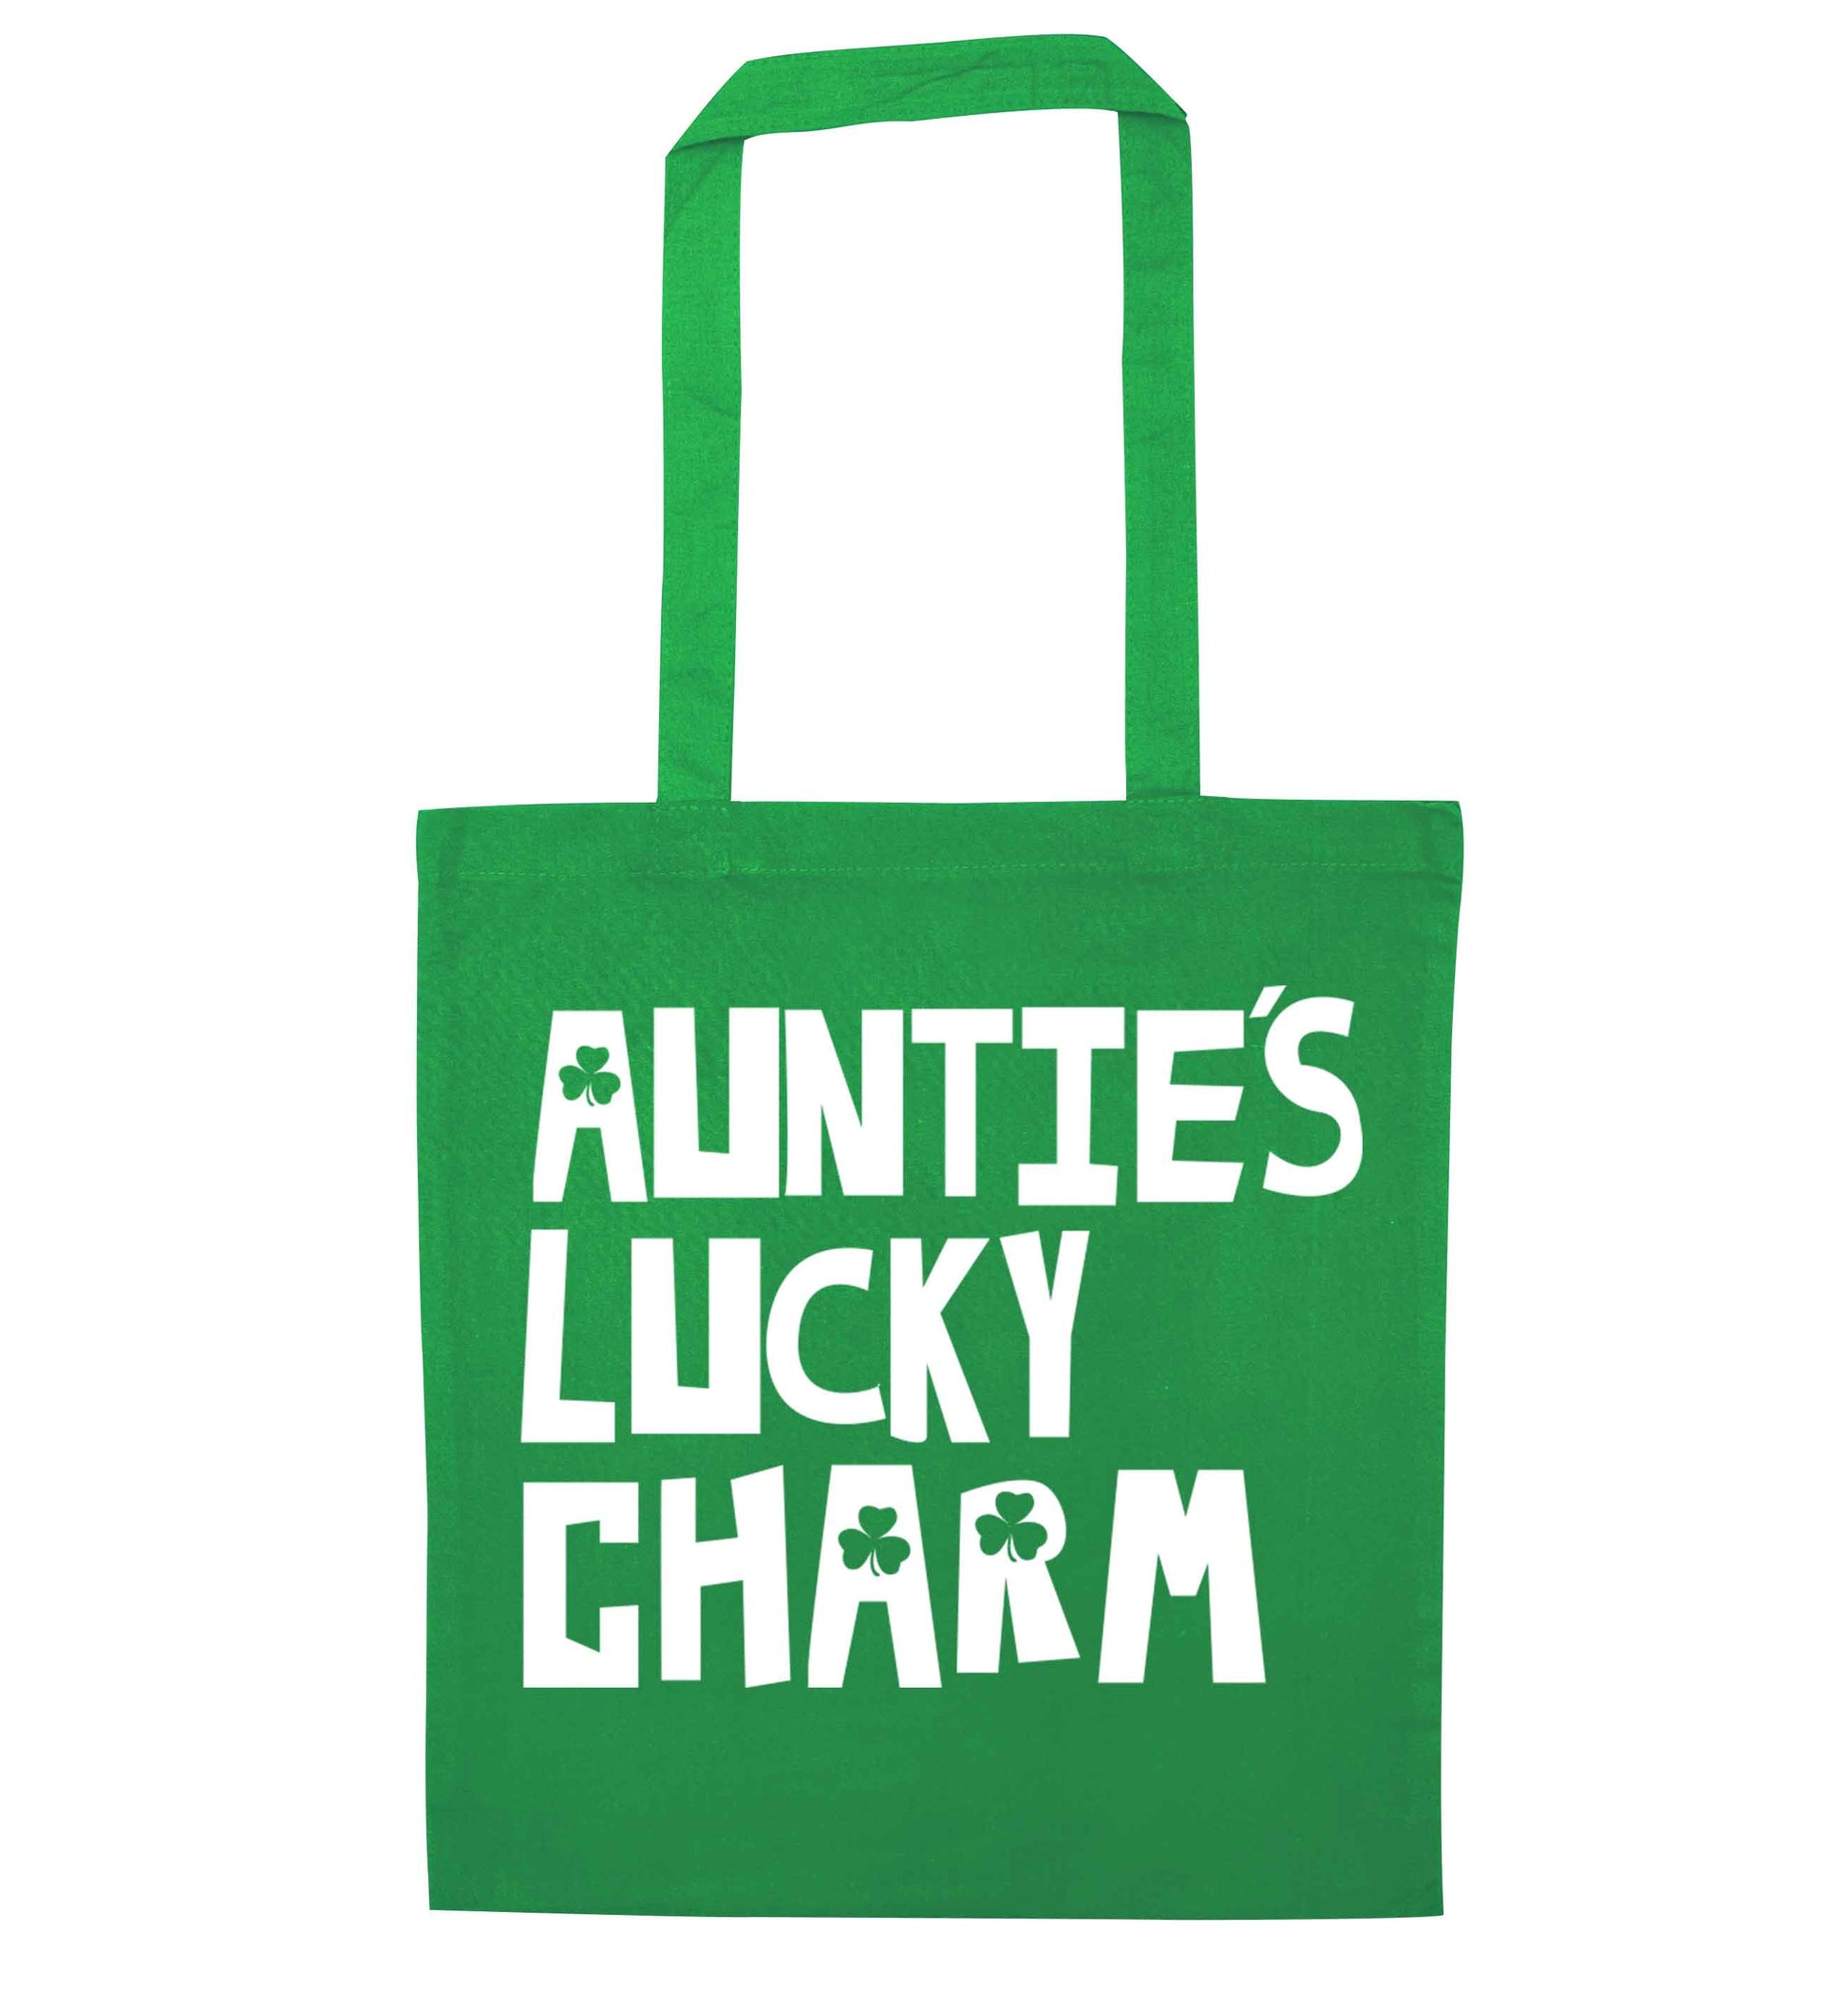 Auntie's lucky charm green tote bag